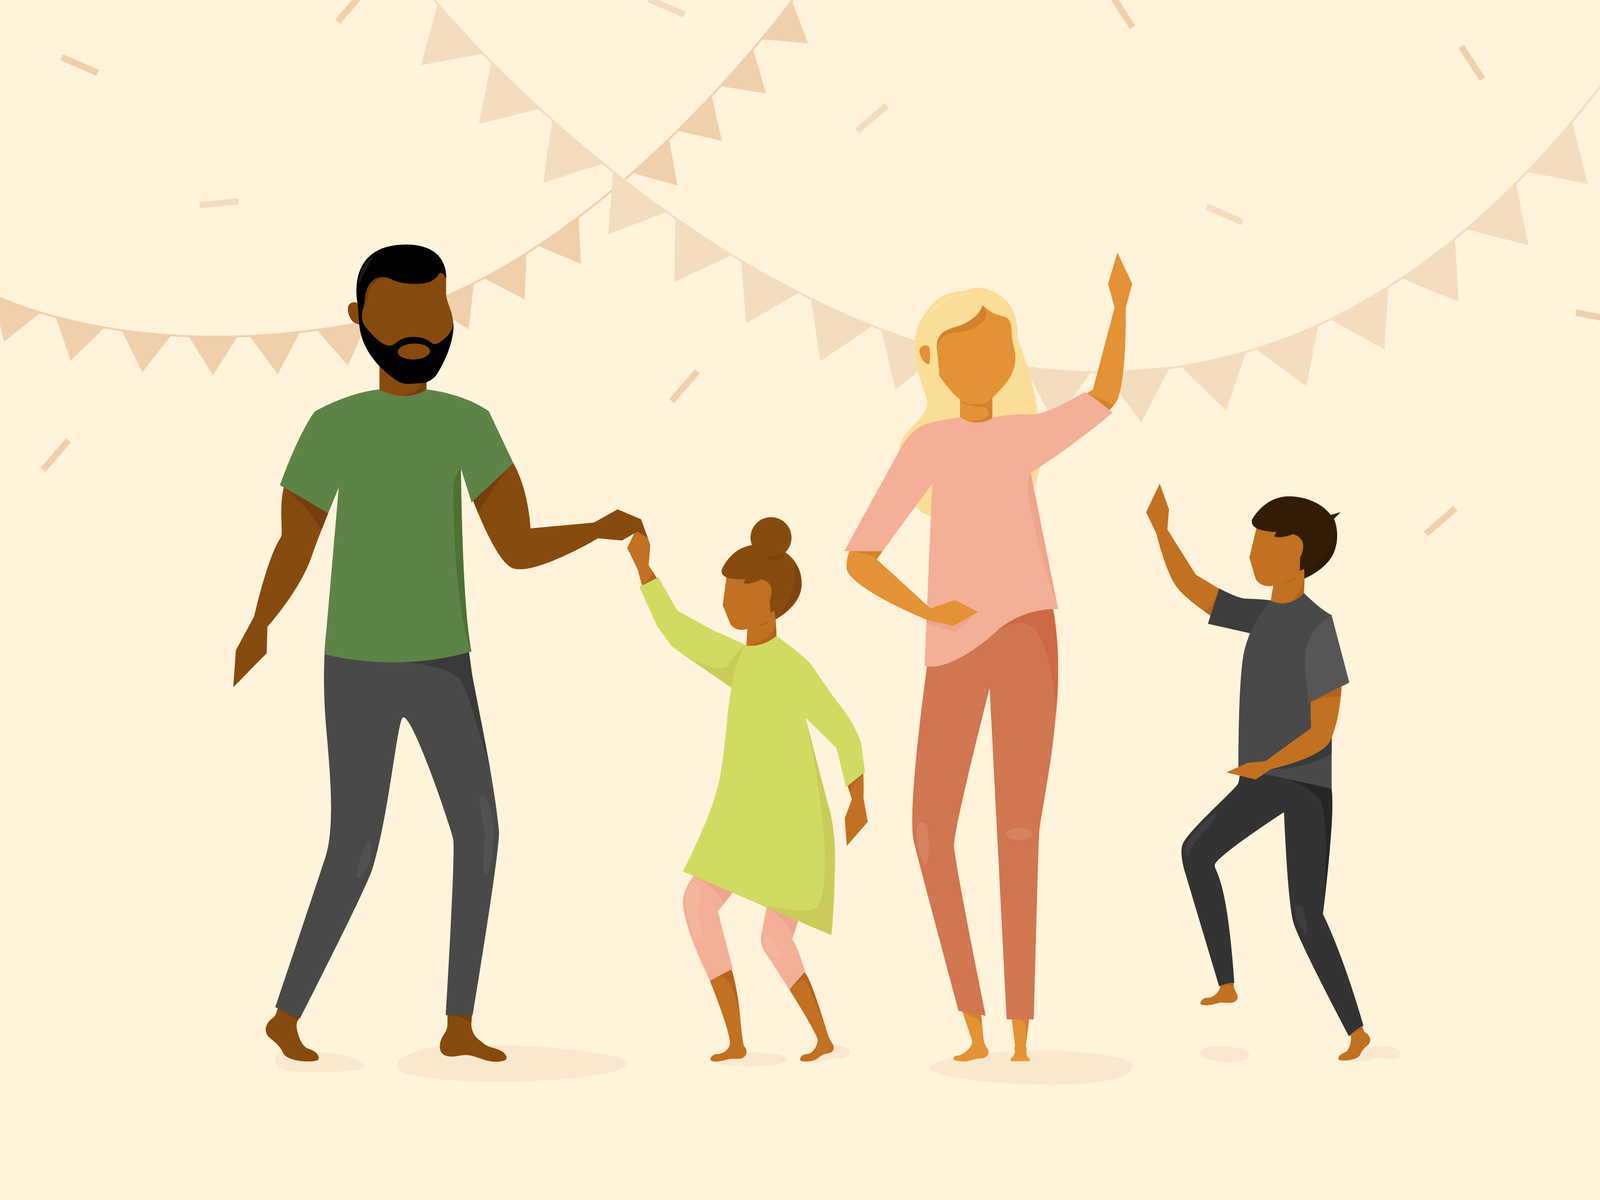 Family Dance Party by Mad Fish Digital on Dribbble